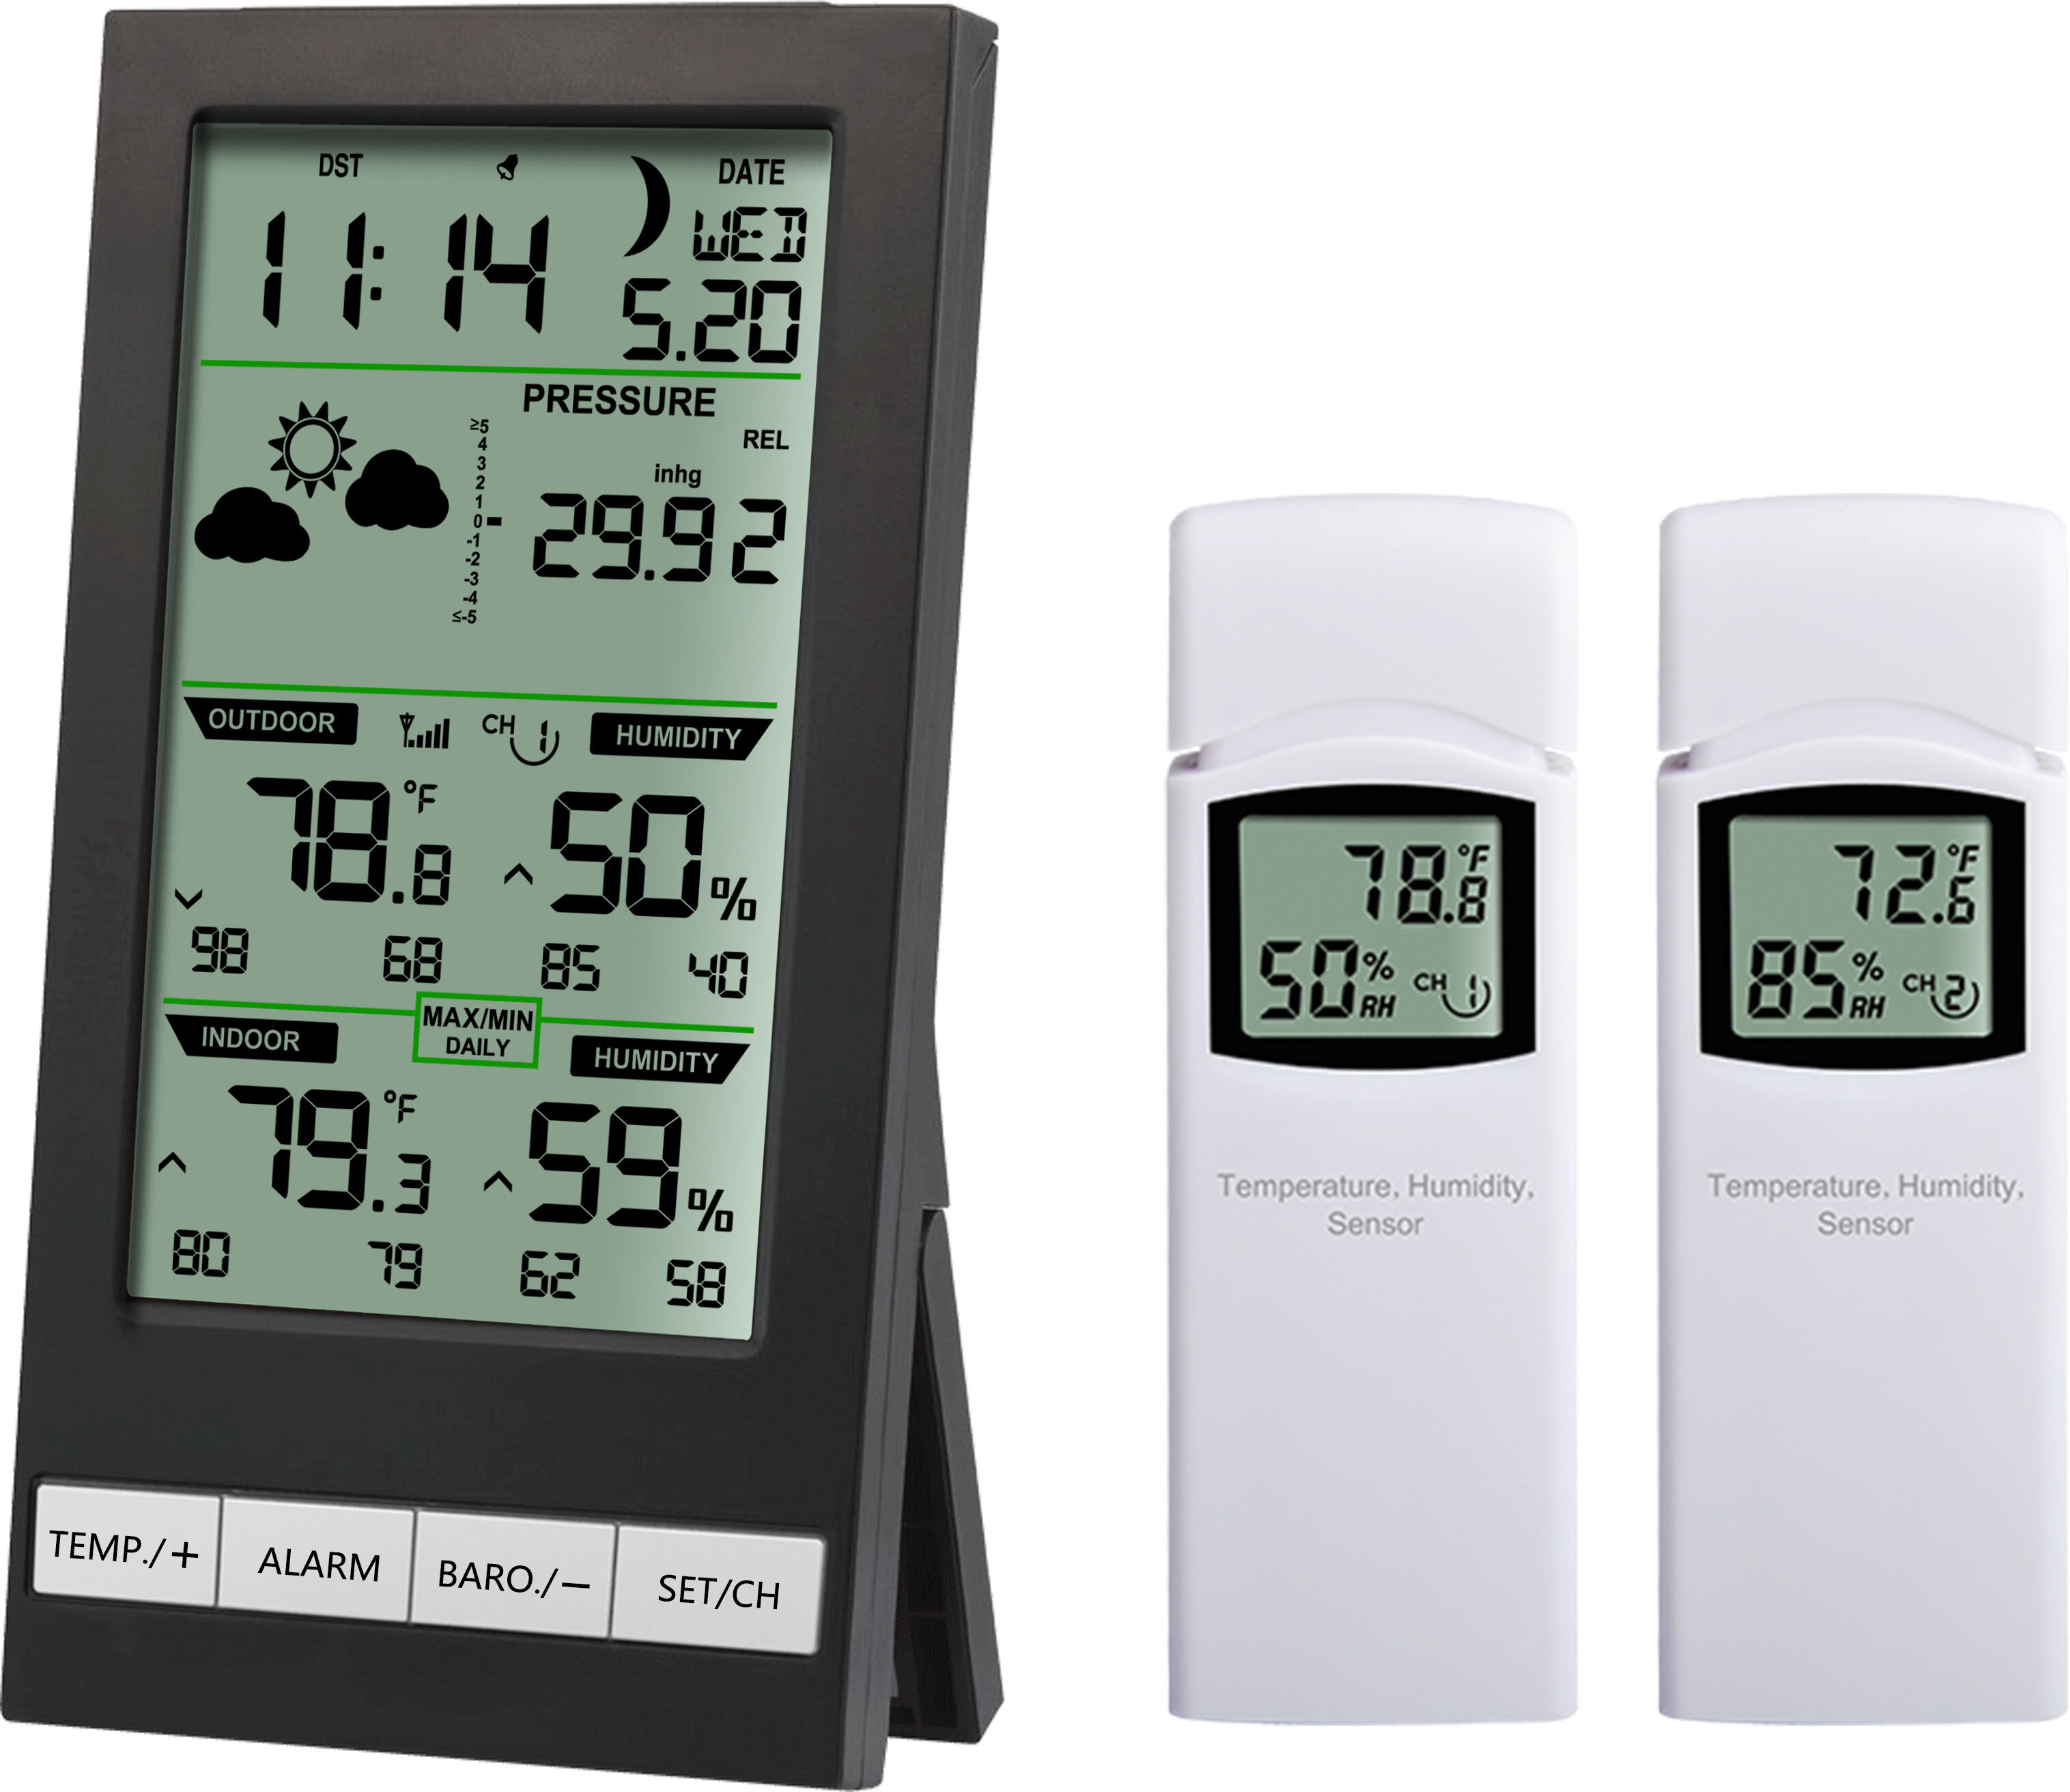 Taylor Wireless Indoor/Outdoor Weather Station with Hygrometer